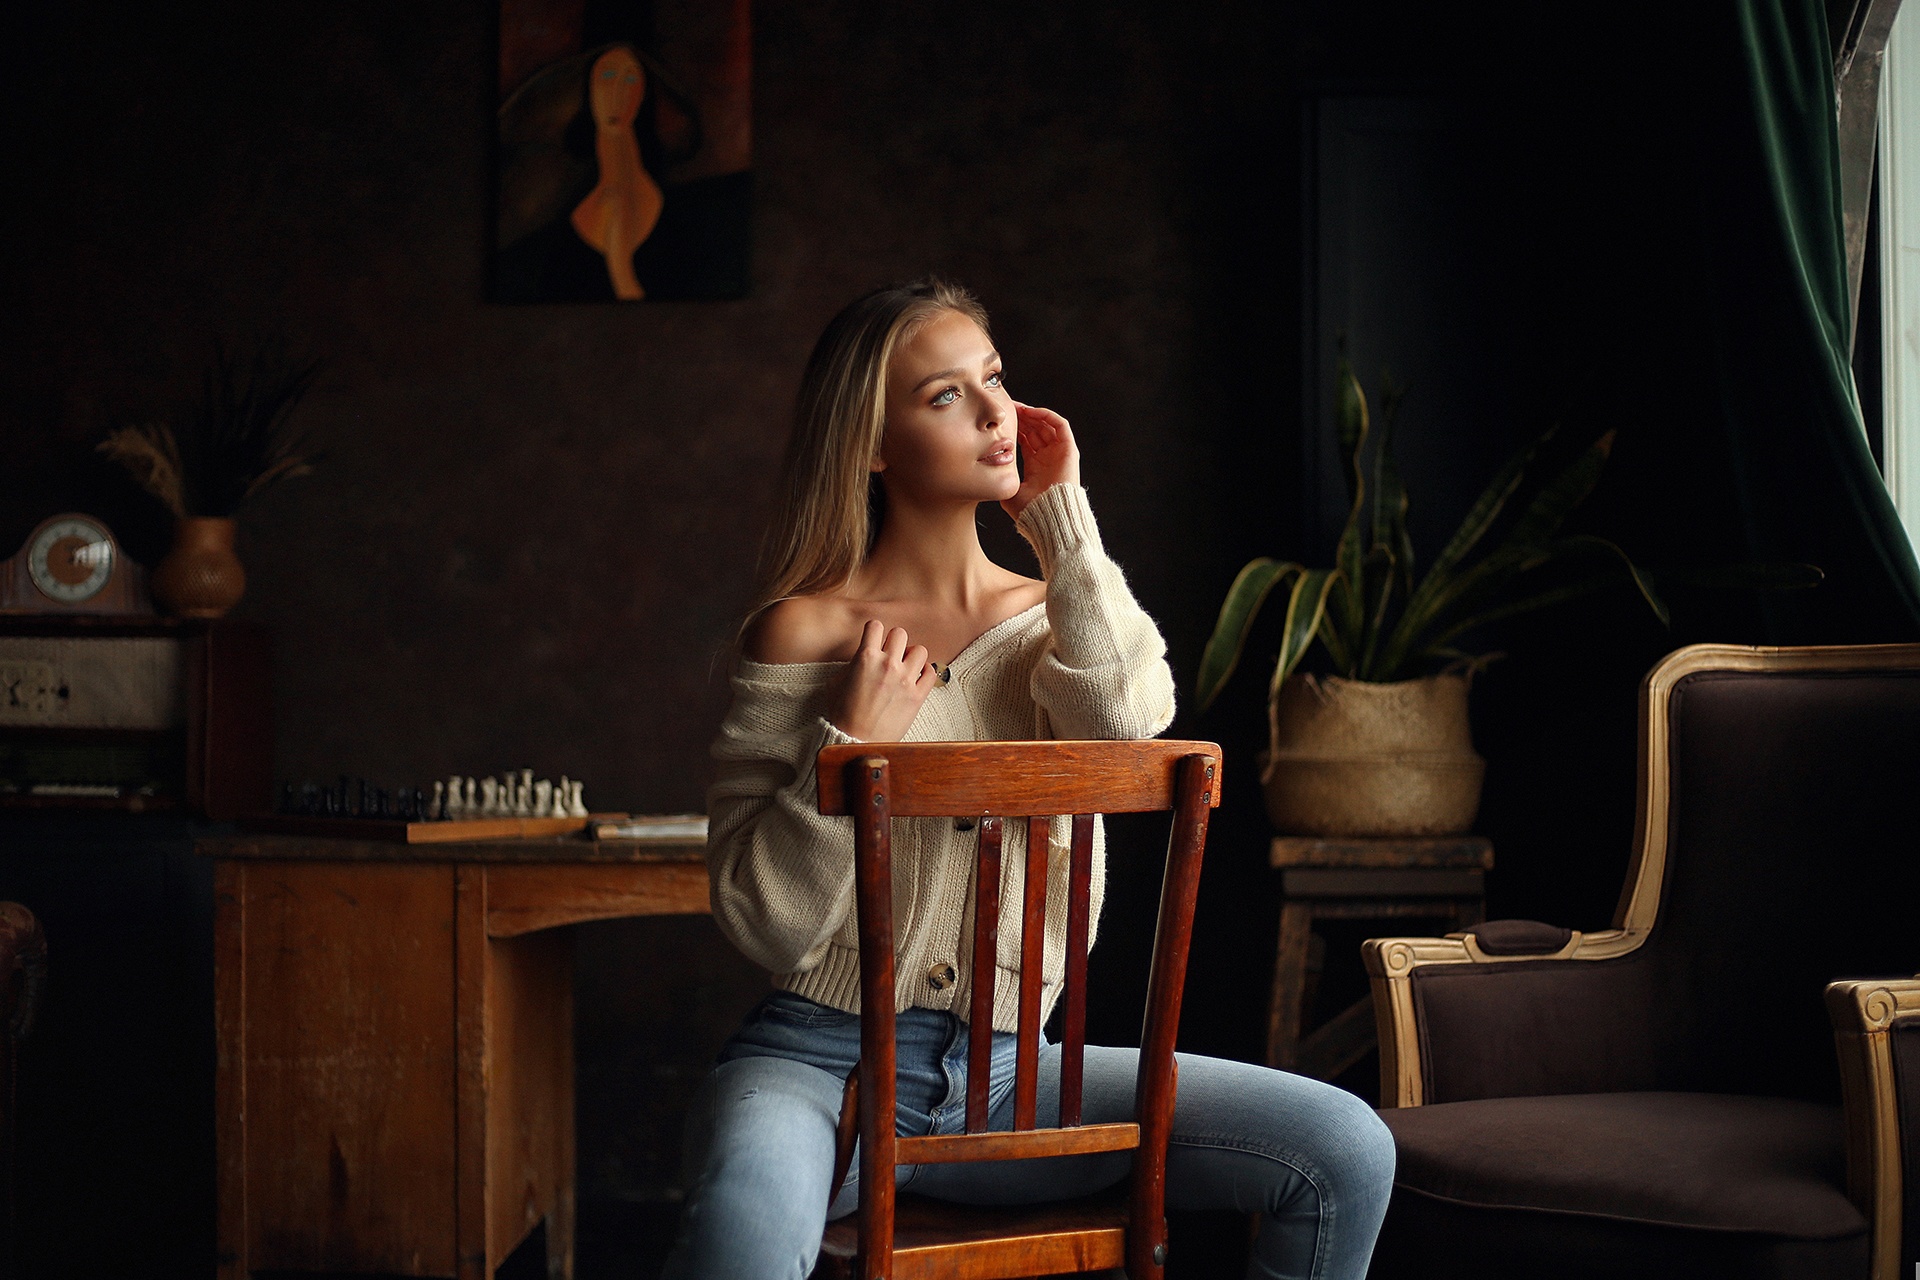 People 1920x1280 Dmitry Arhar women model blonde women indoors chair sitting jeans sweater couch chess desk plants hips